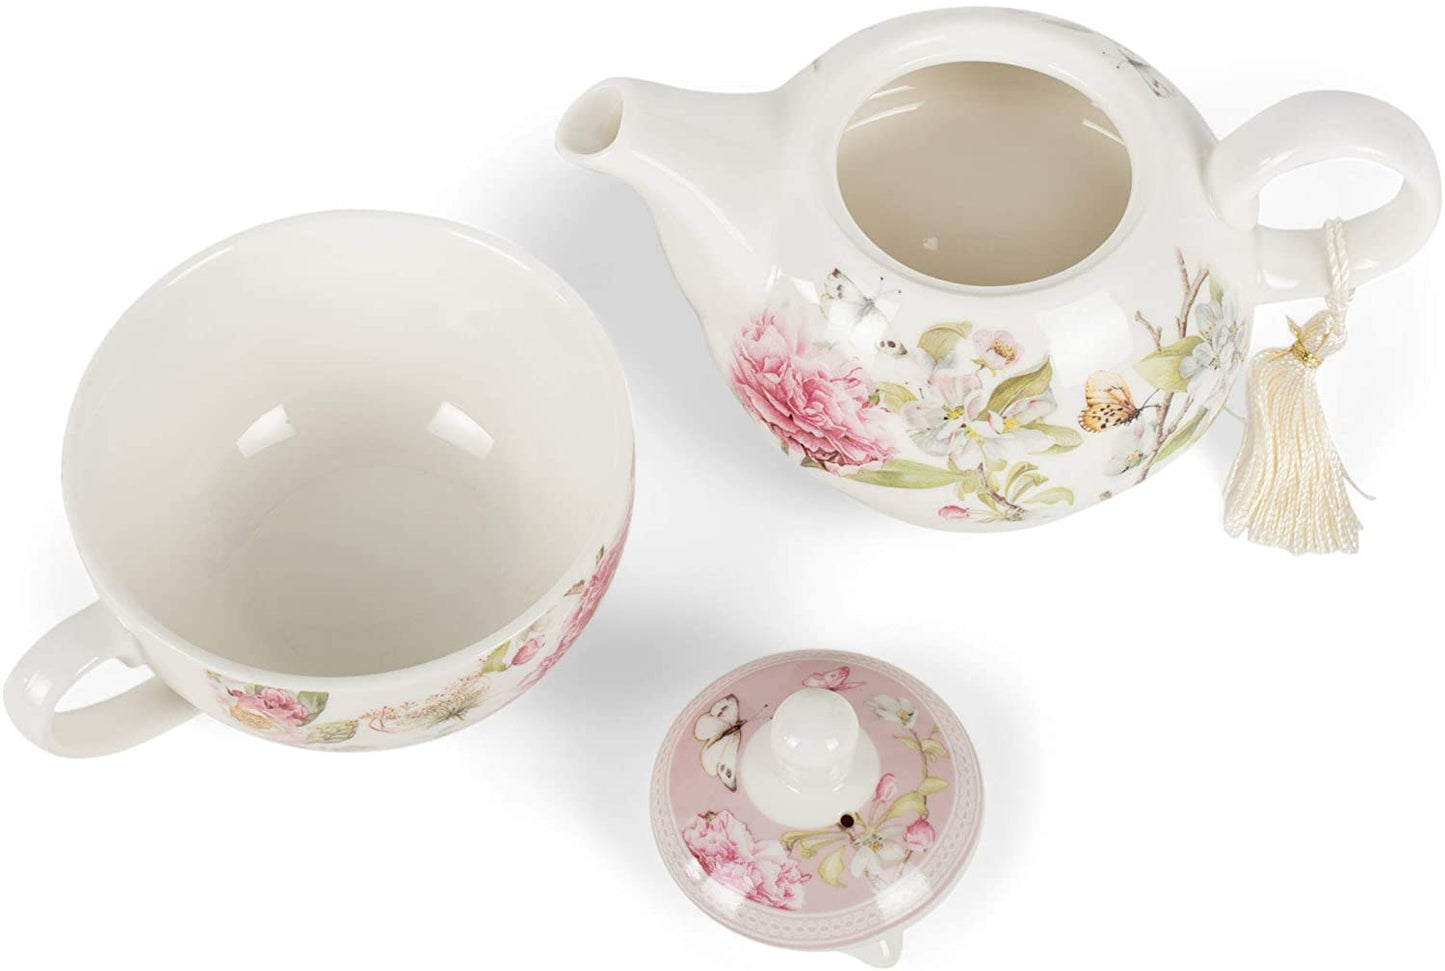 5.8" Porcelain Tea for One, Pink Peony